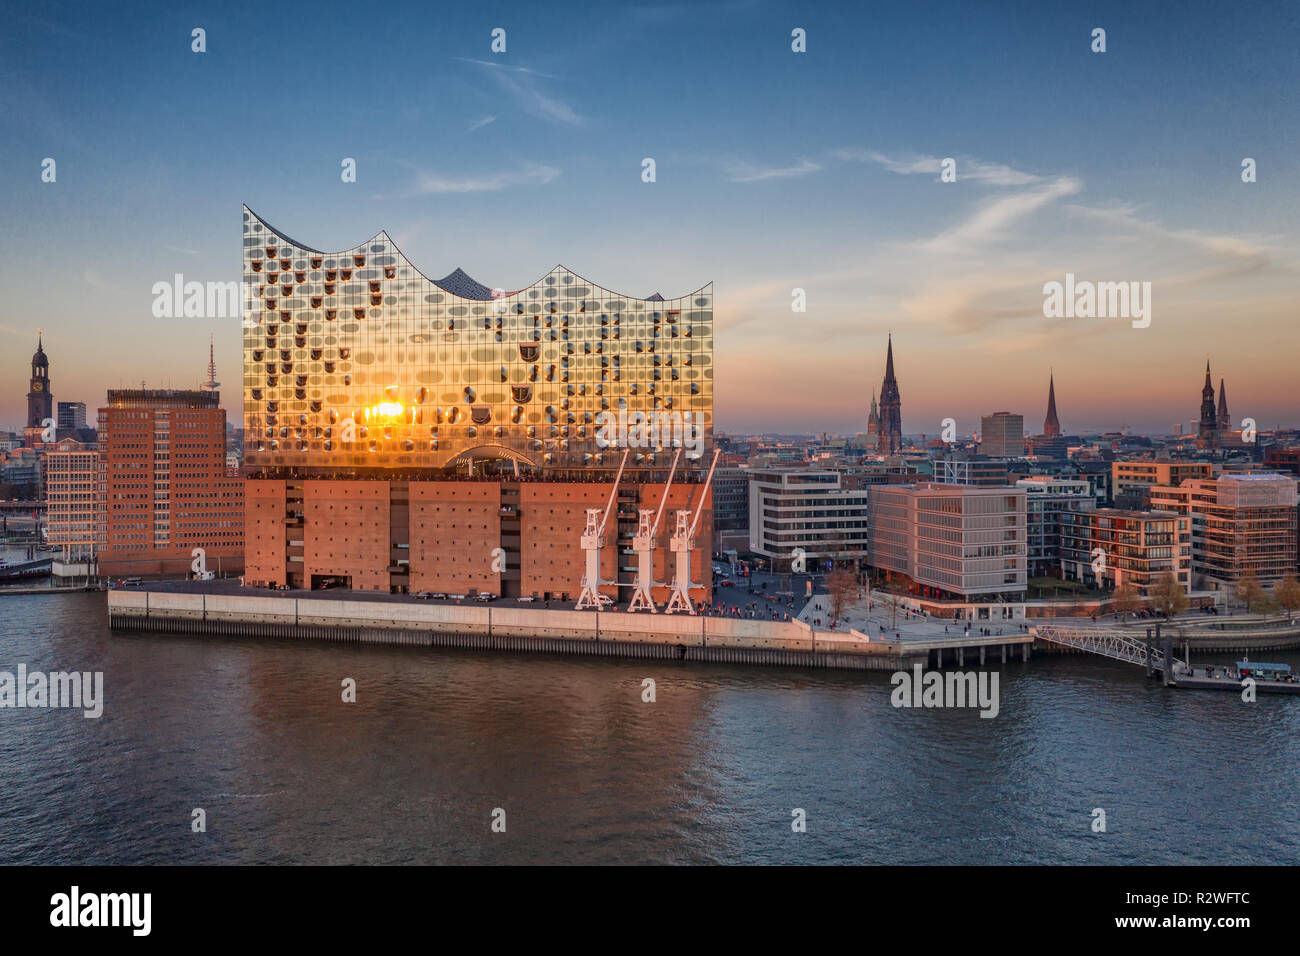 The Elbe Philharmonic is a concert hall in the Hafencity quarter and a new landmark in Hamburg Stock Photo